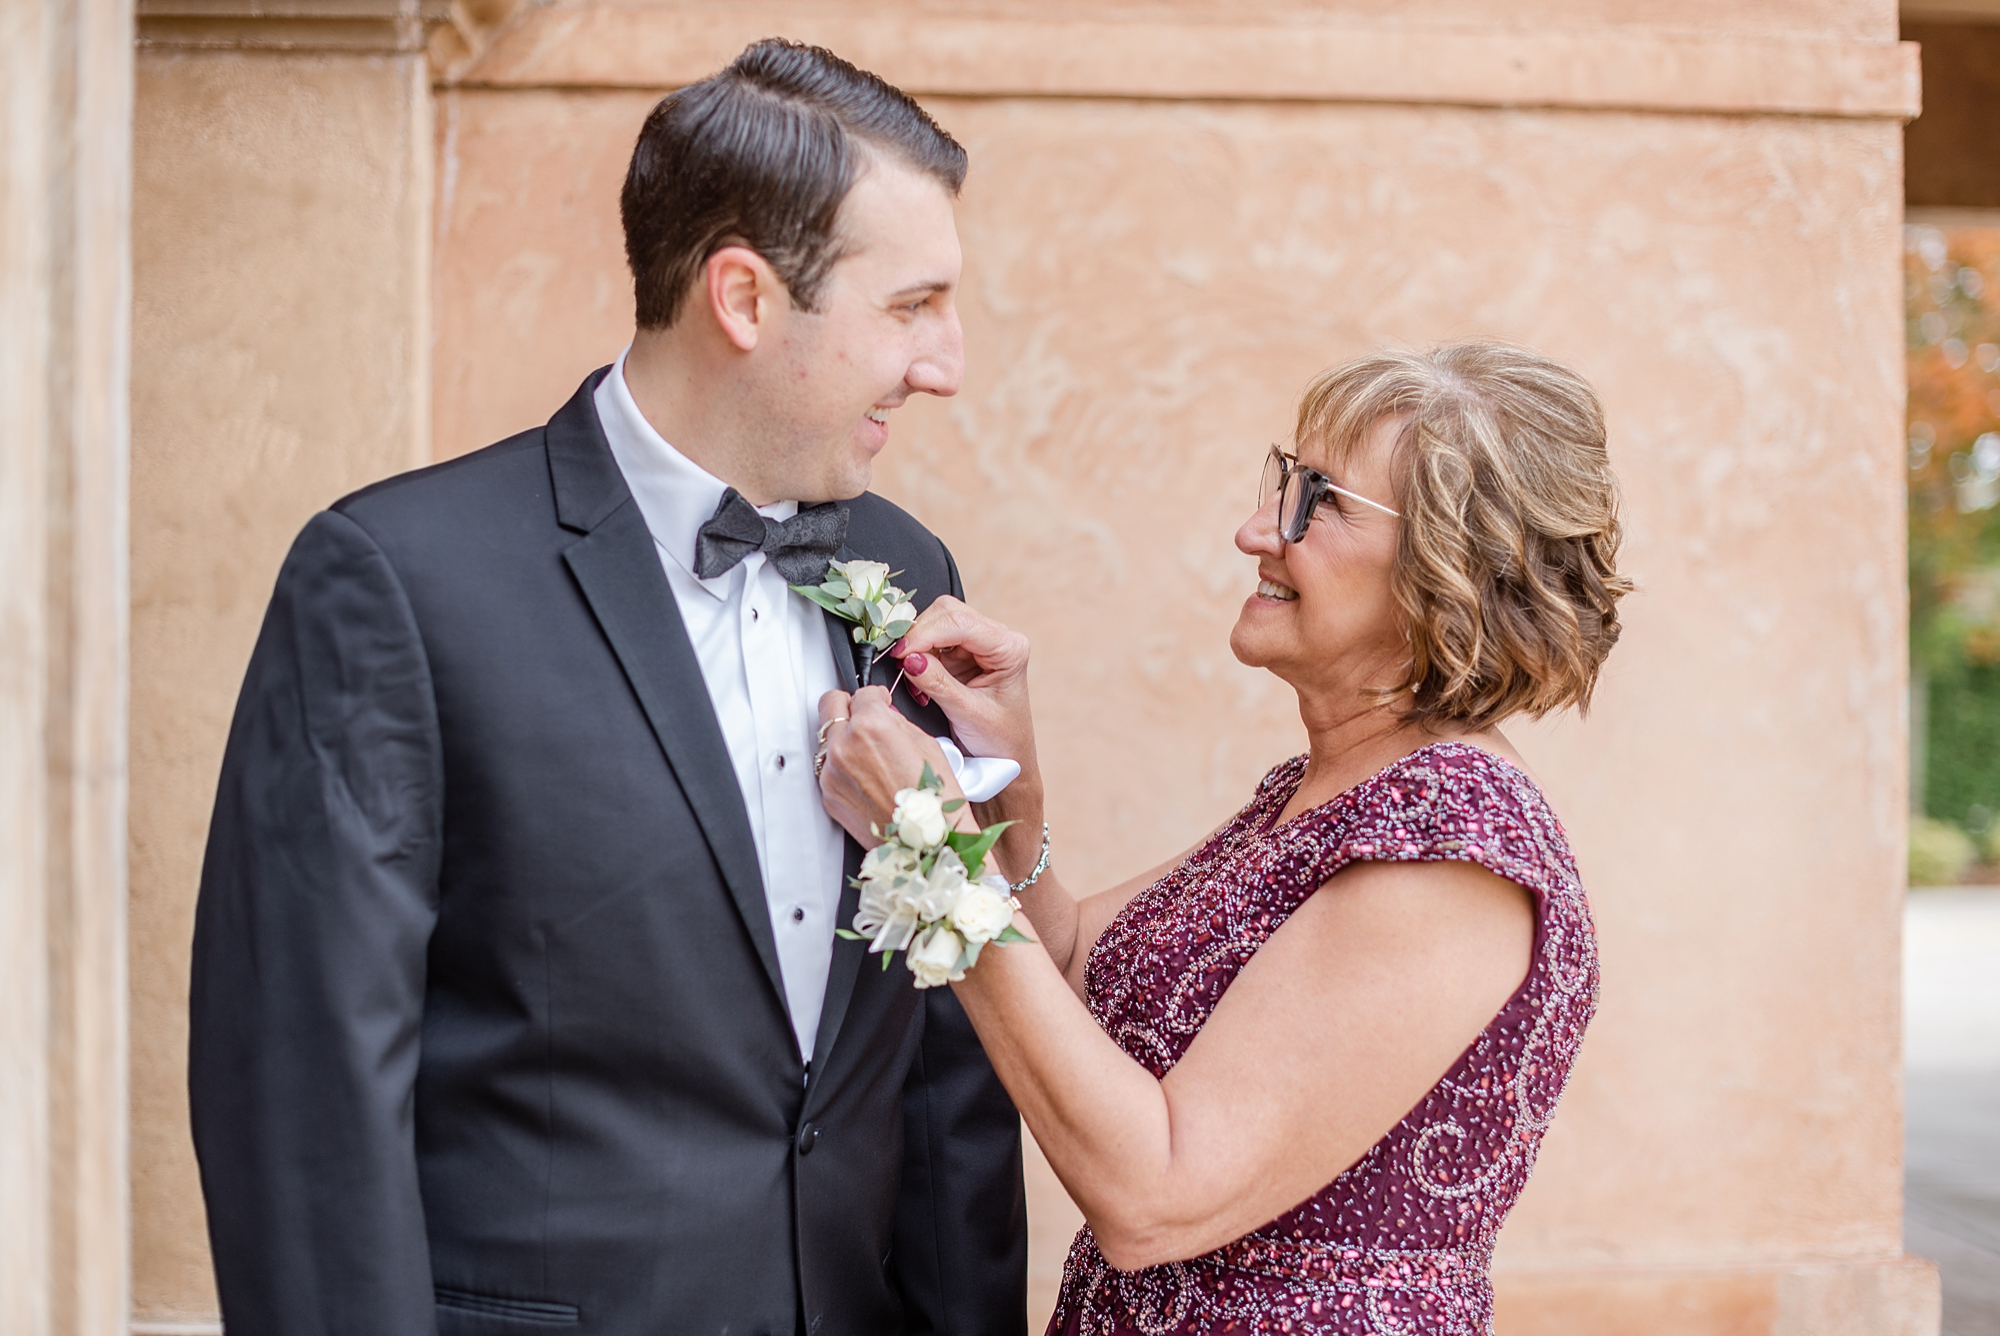 mother of the groom puts boutonnière on